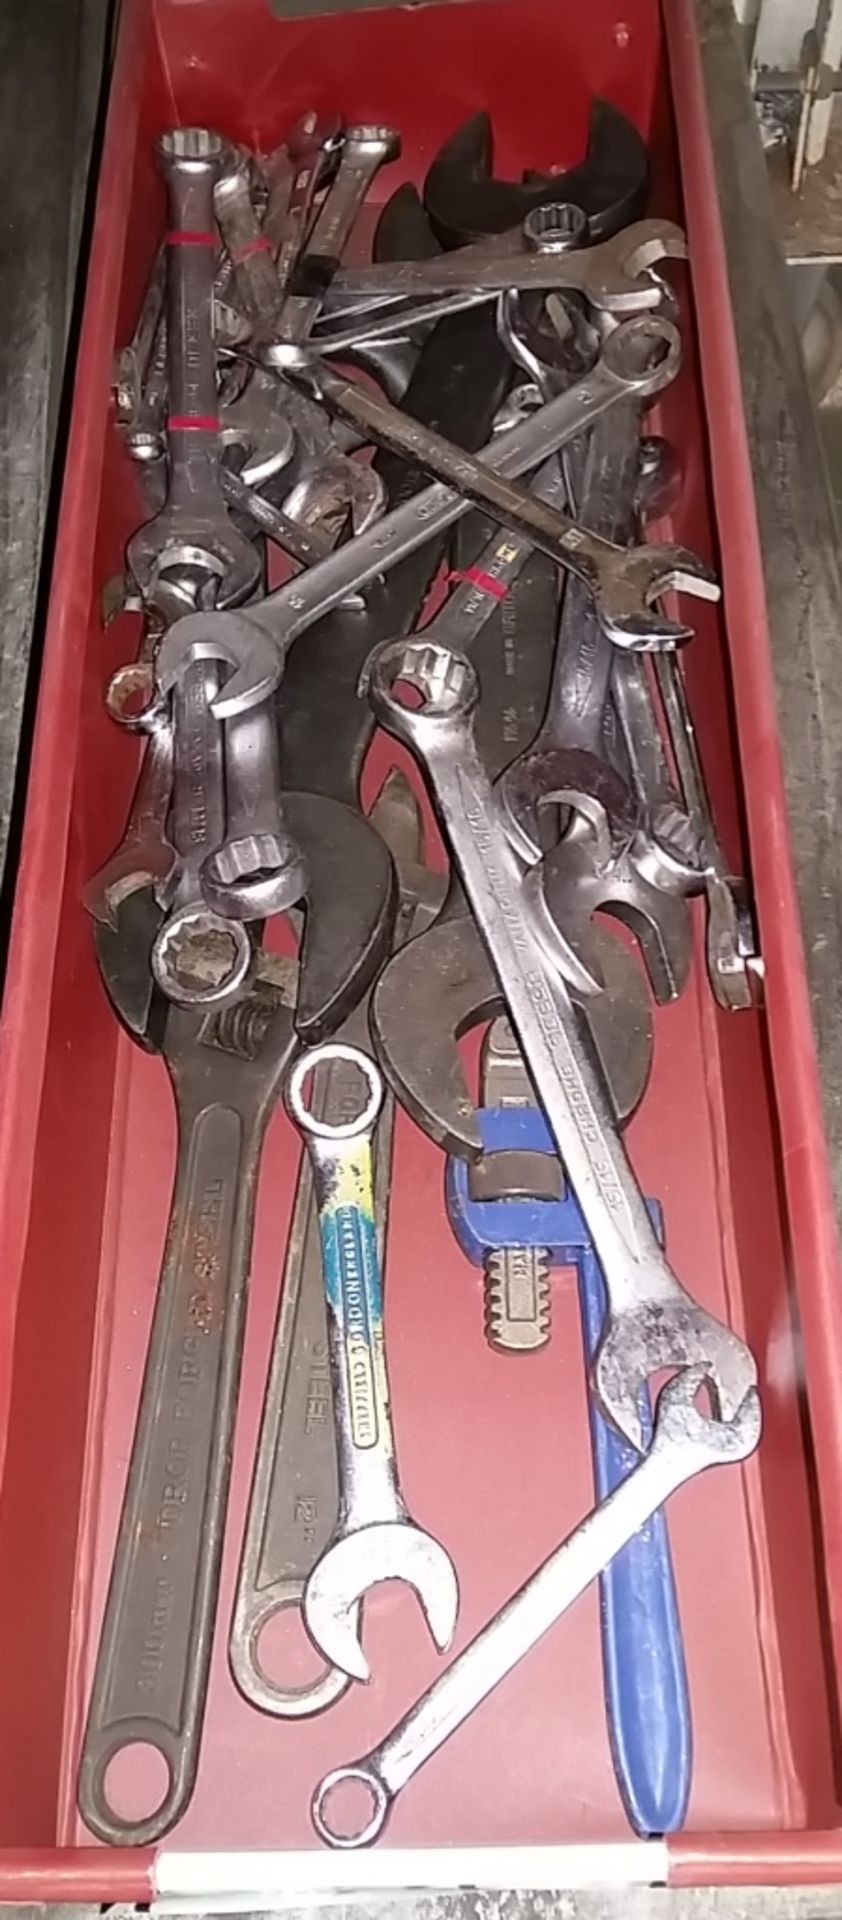 Ring spanners, adjustable wrenches